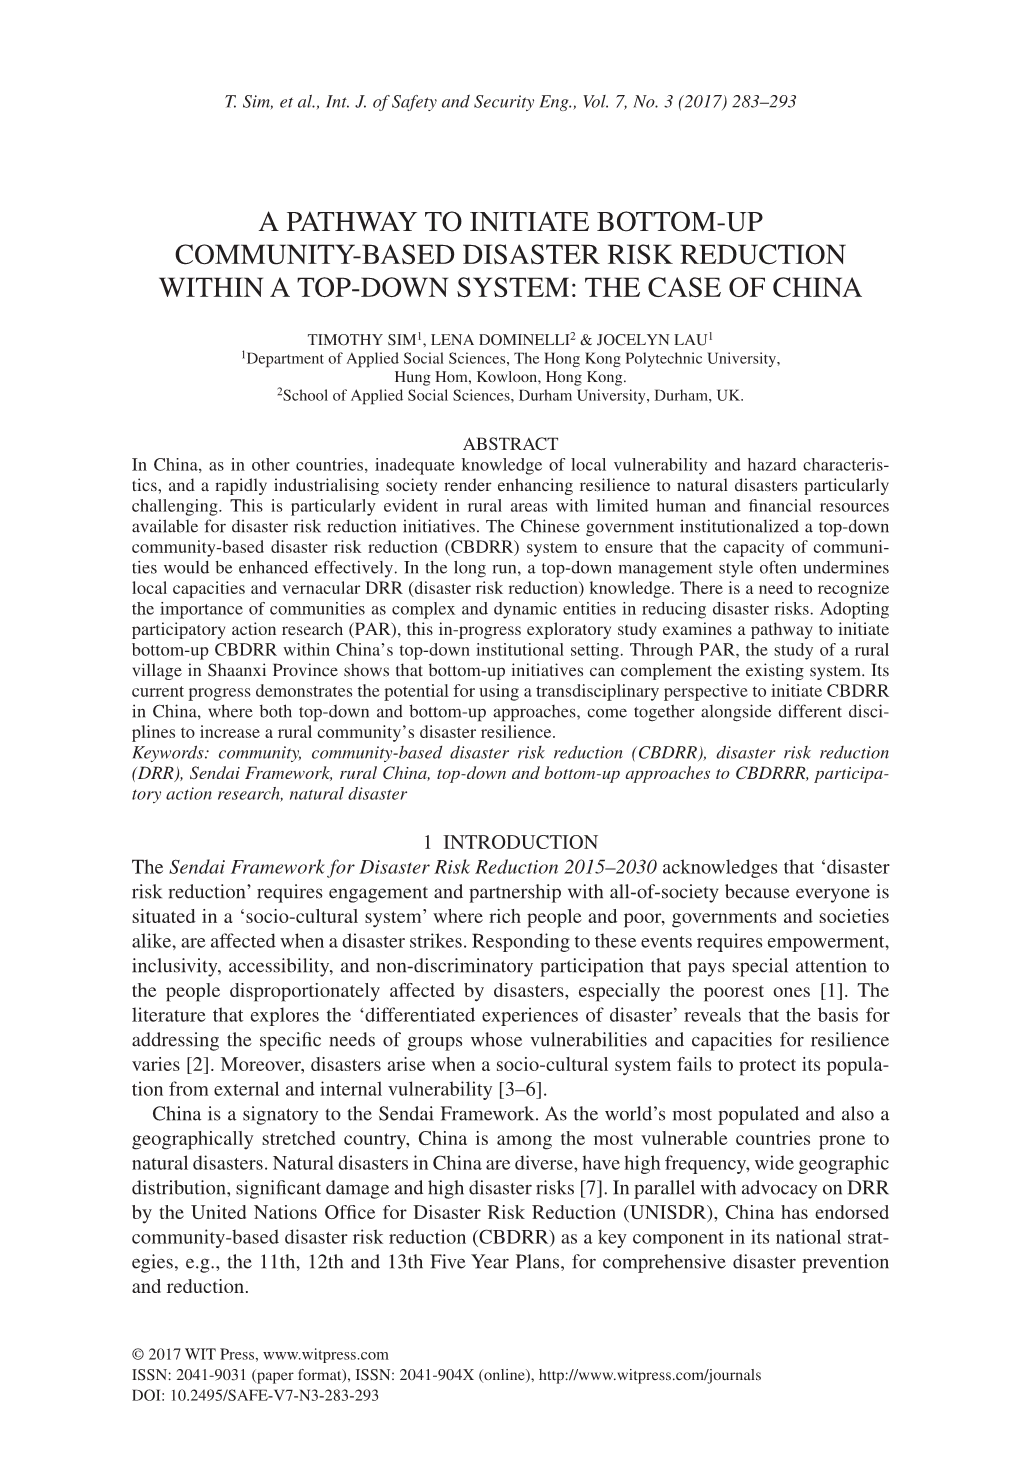 A Pathway to Initiate Bottom-Up Community- Based Disaster Risk Reduction Within a Top-Down System: the Case of China